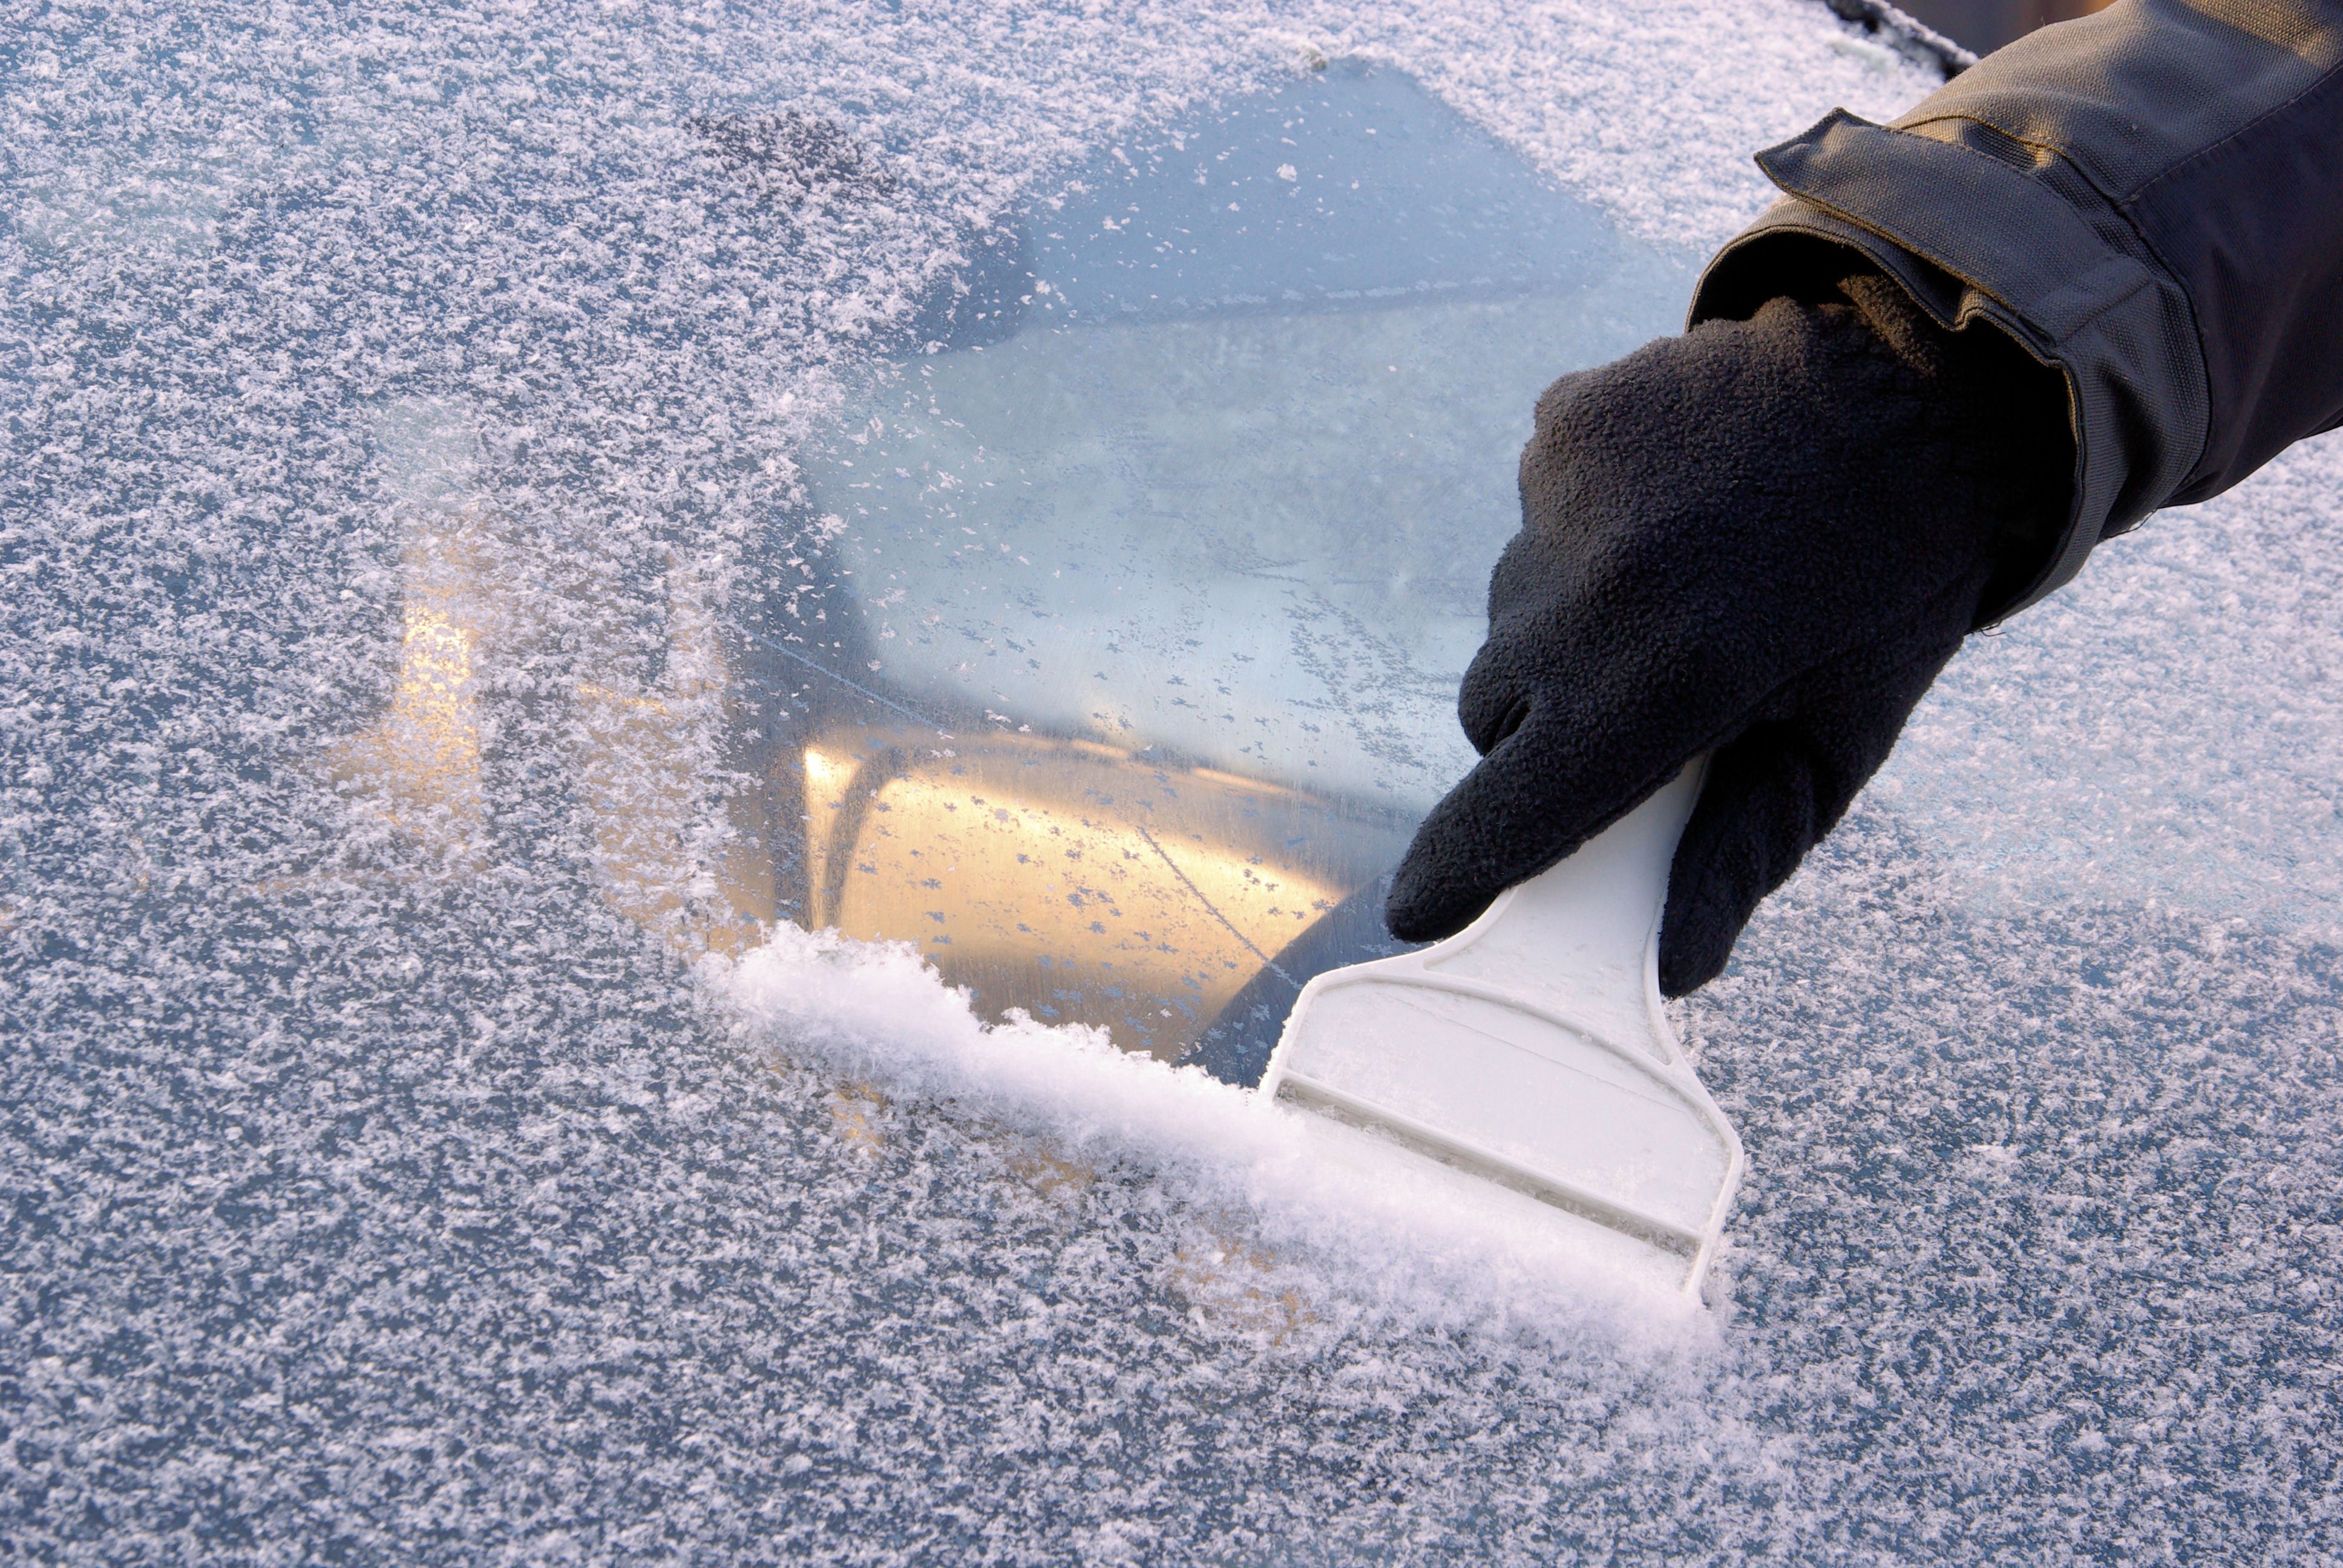 How Can You De-Ice Your Windshield?